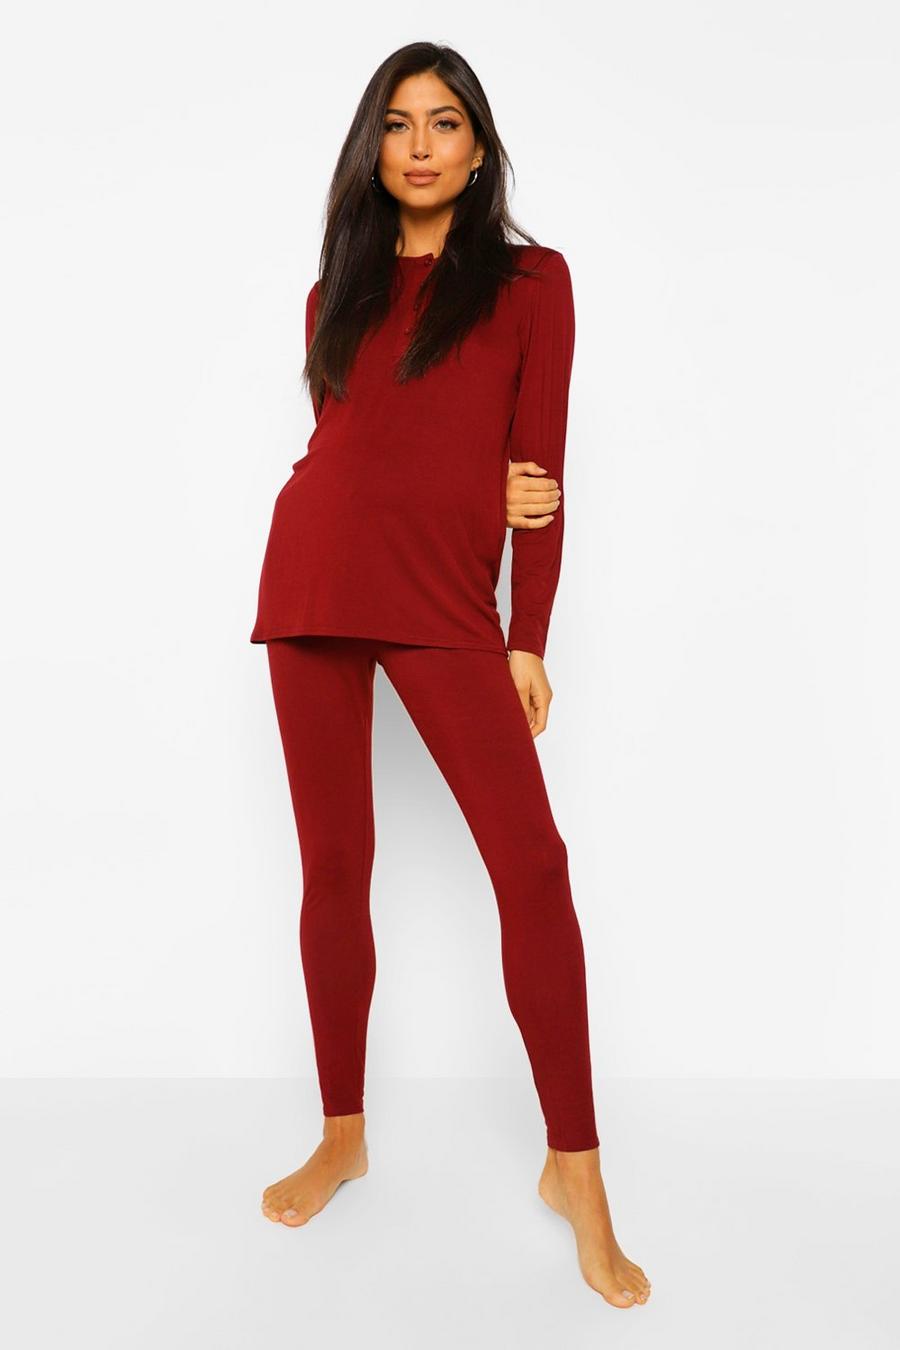 Berry red Maternity Button Front Long Sleeve Pajama Set